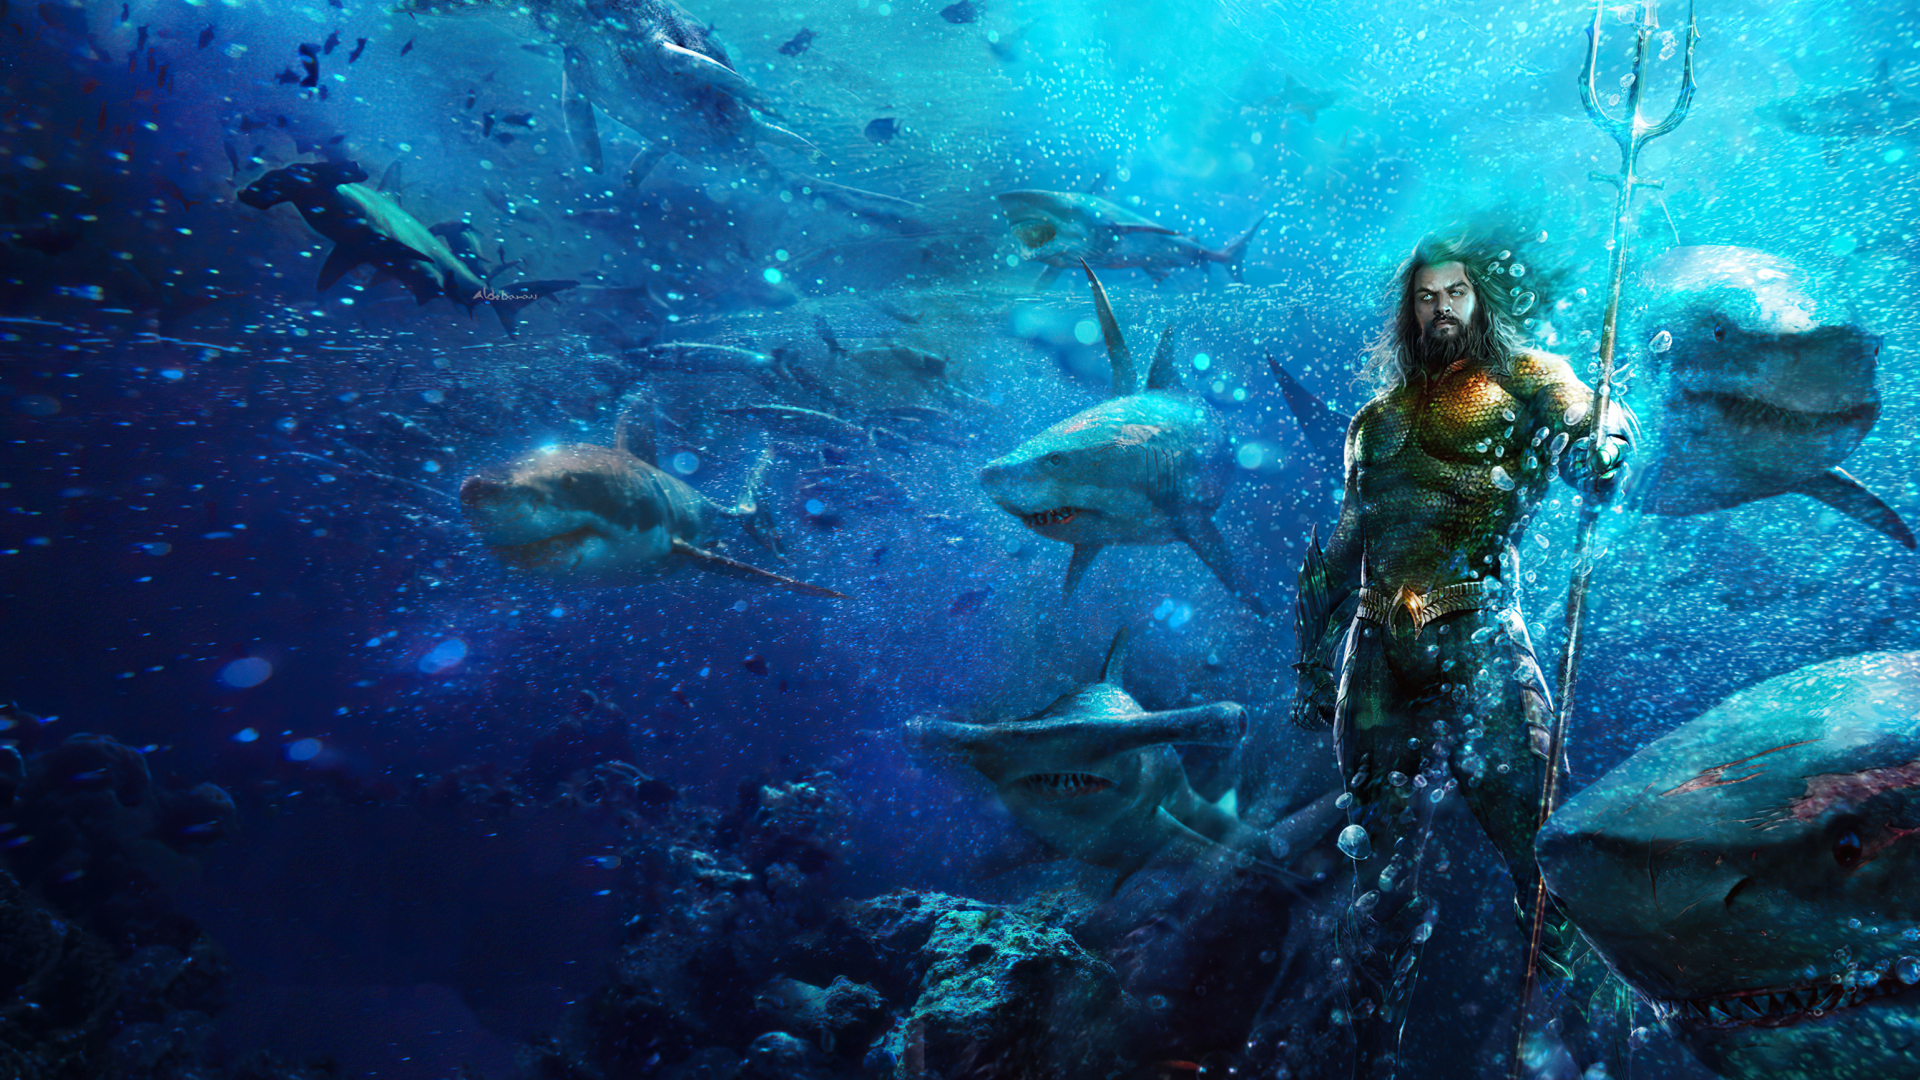 Aquaman download the new for android